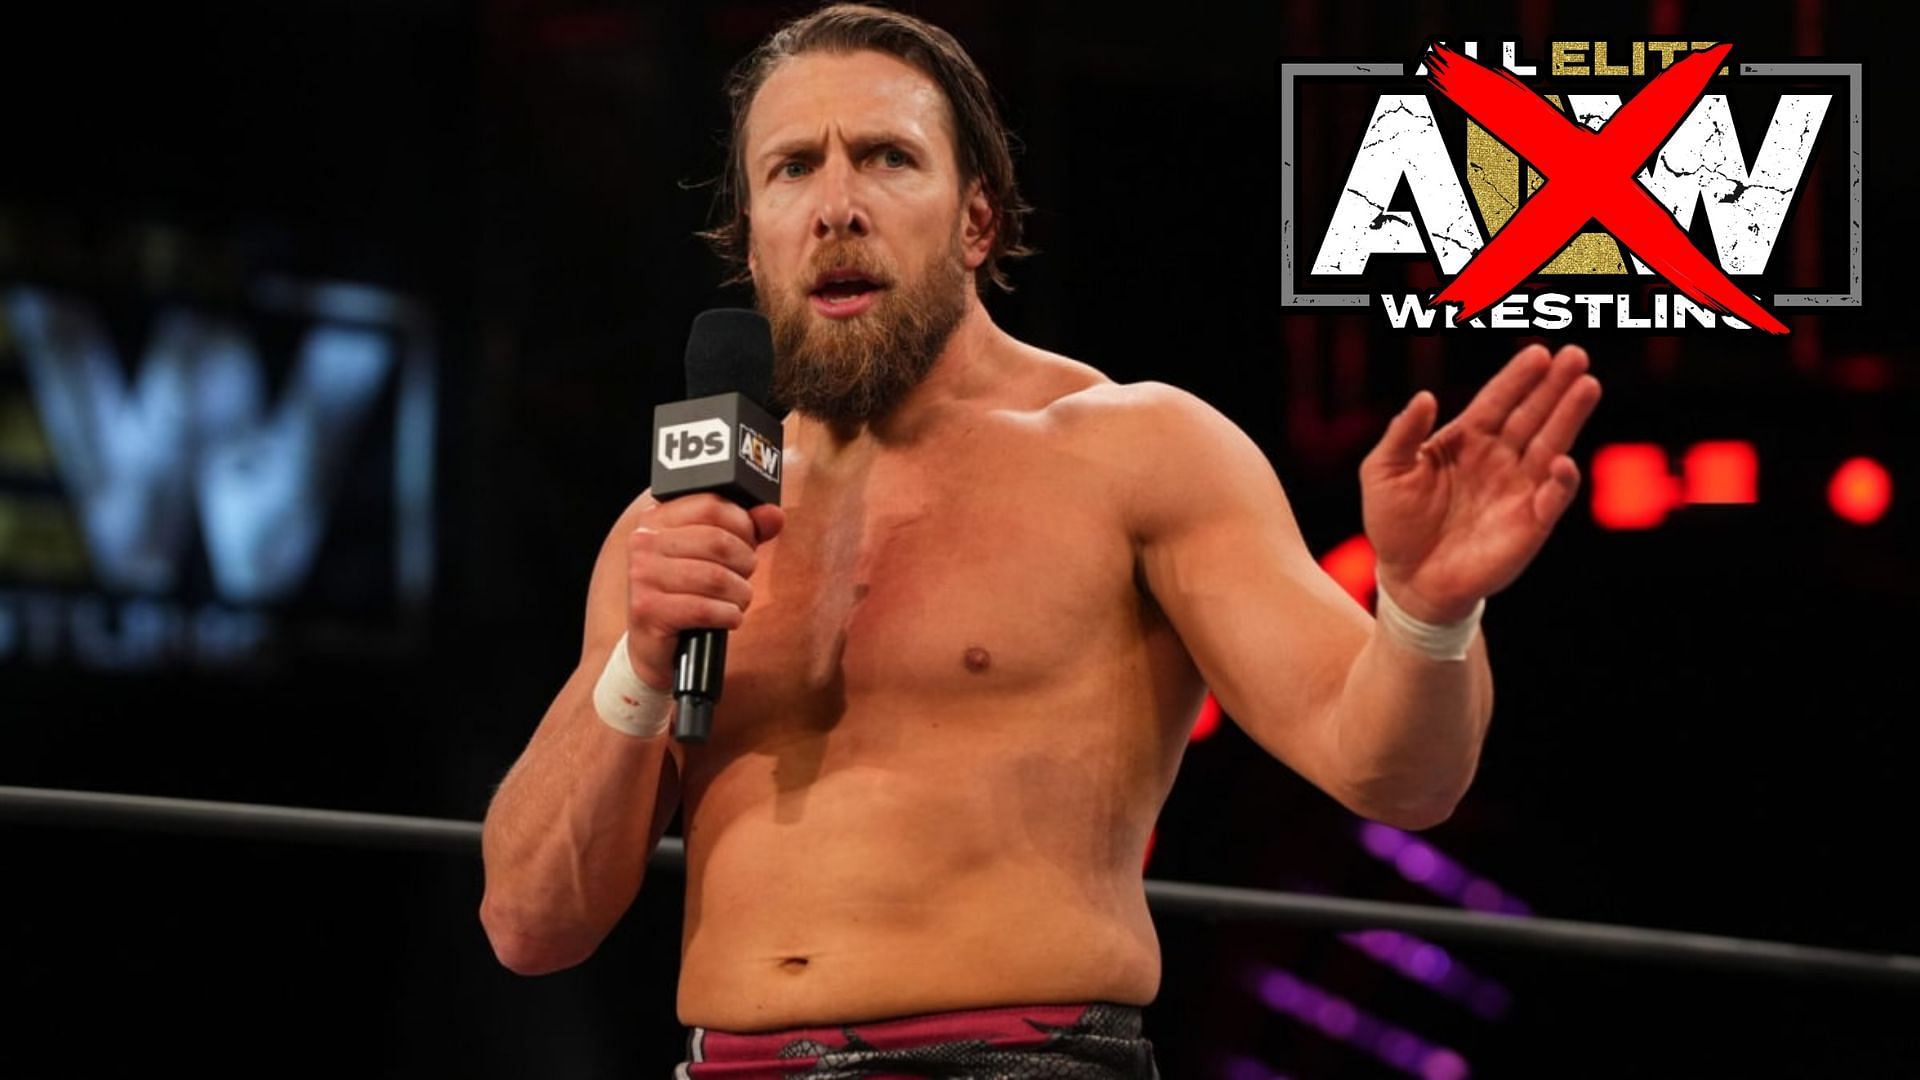 Will The American Dragon push this star out of AEW?